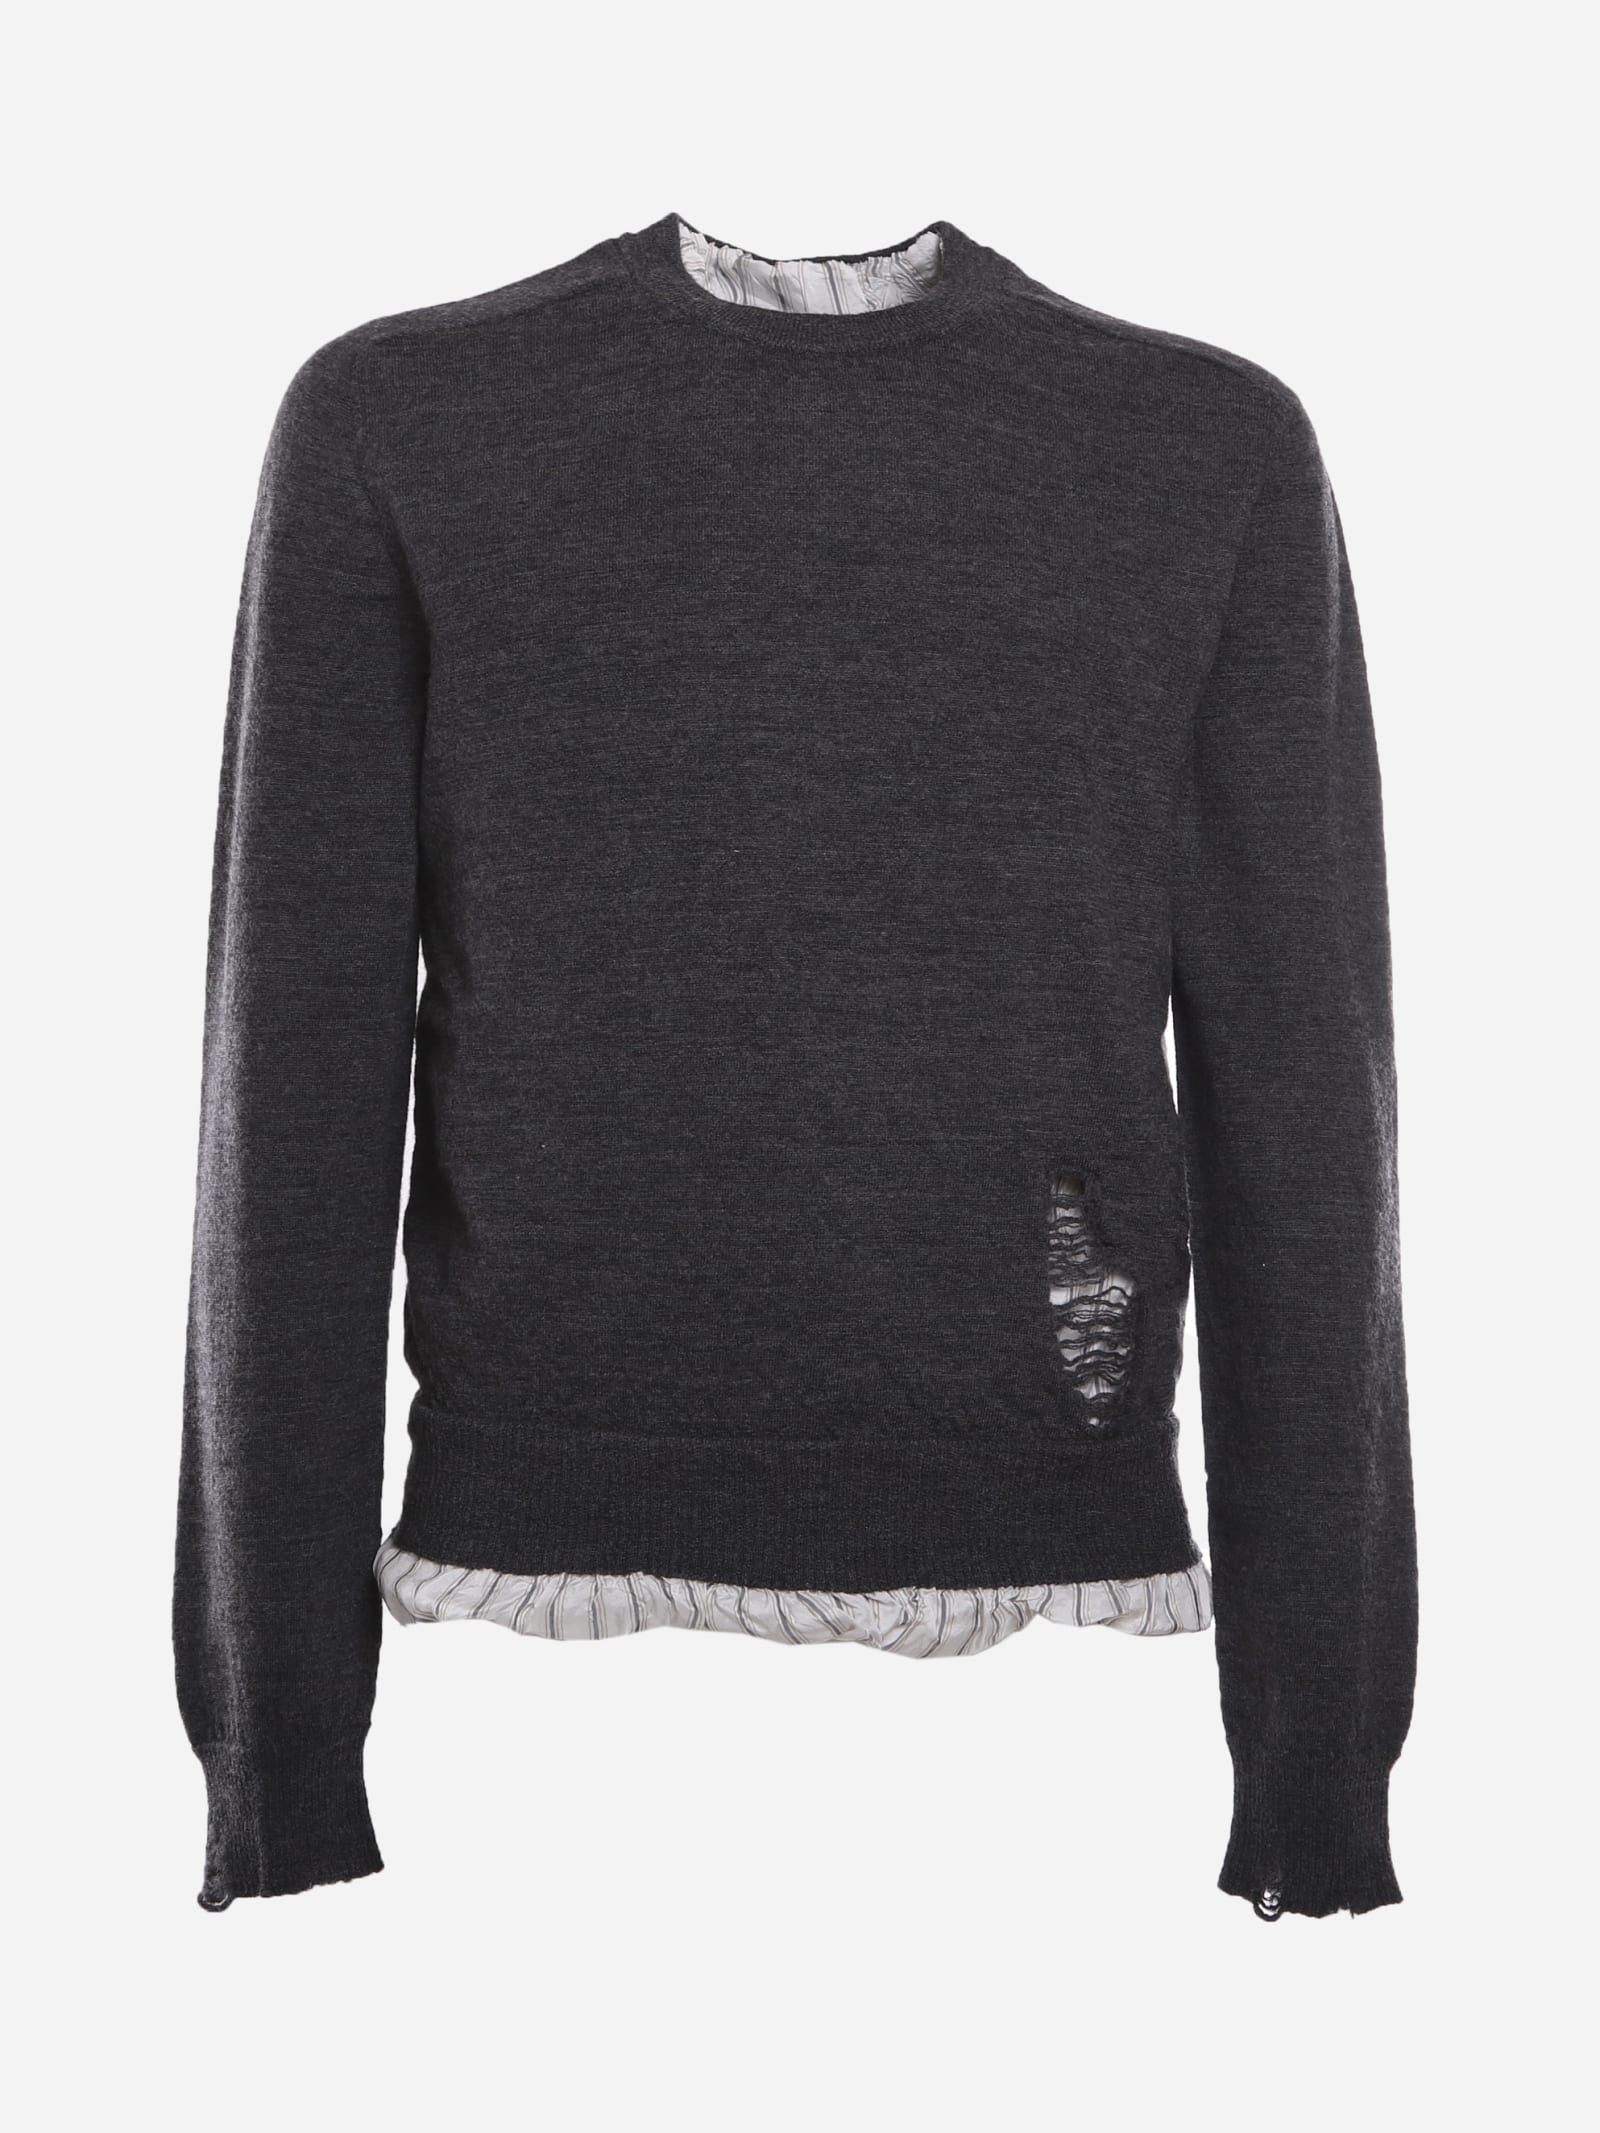 Maison Margiela Wool Sweater With Contrasting Insert